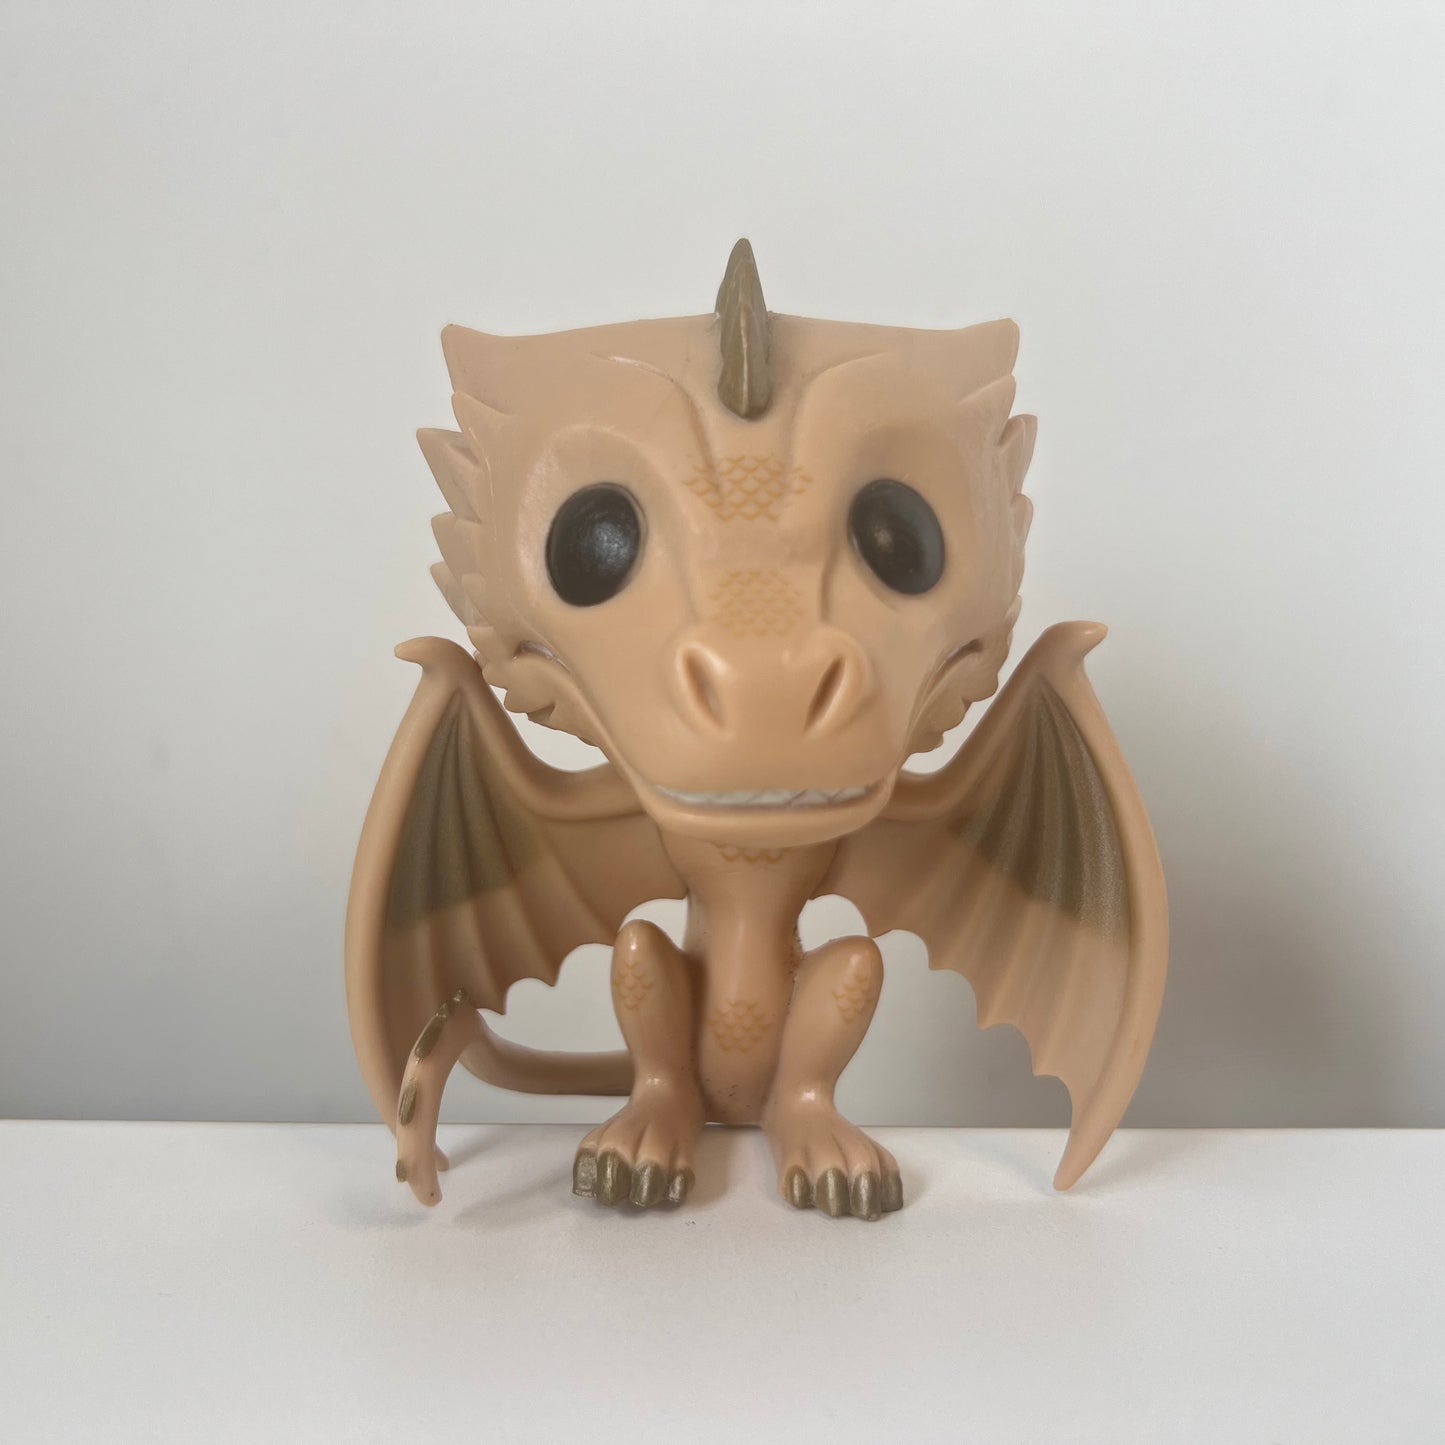 Game of Thrones - Viserion 22 Funko Pop (No Box or Insert Included)